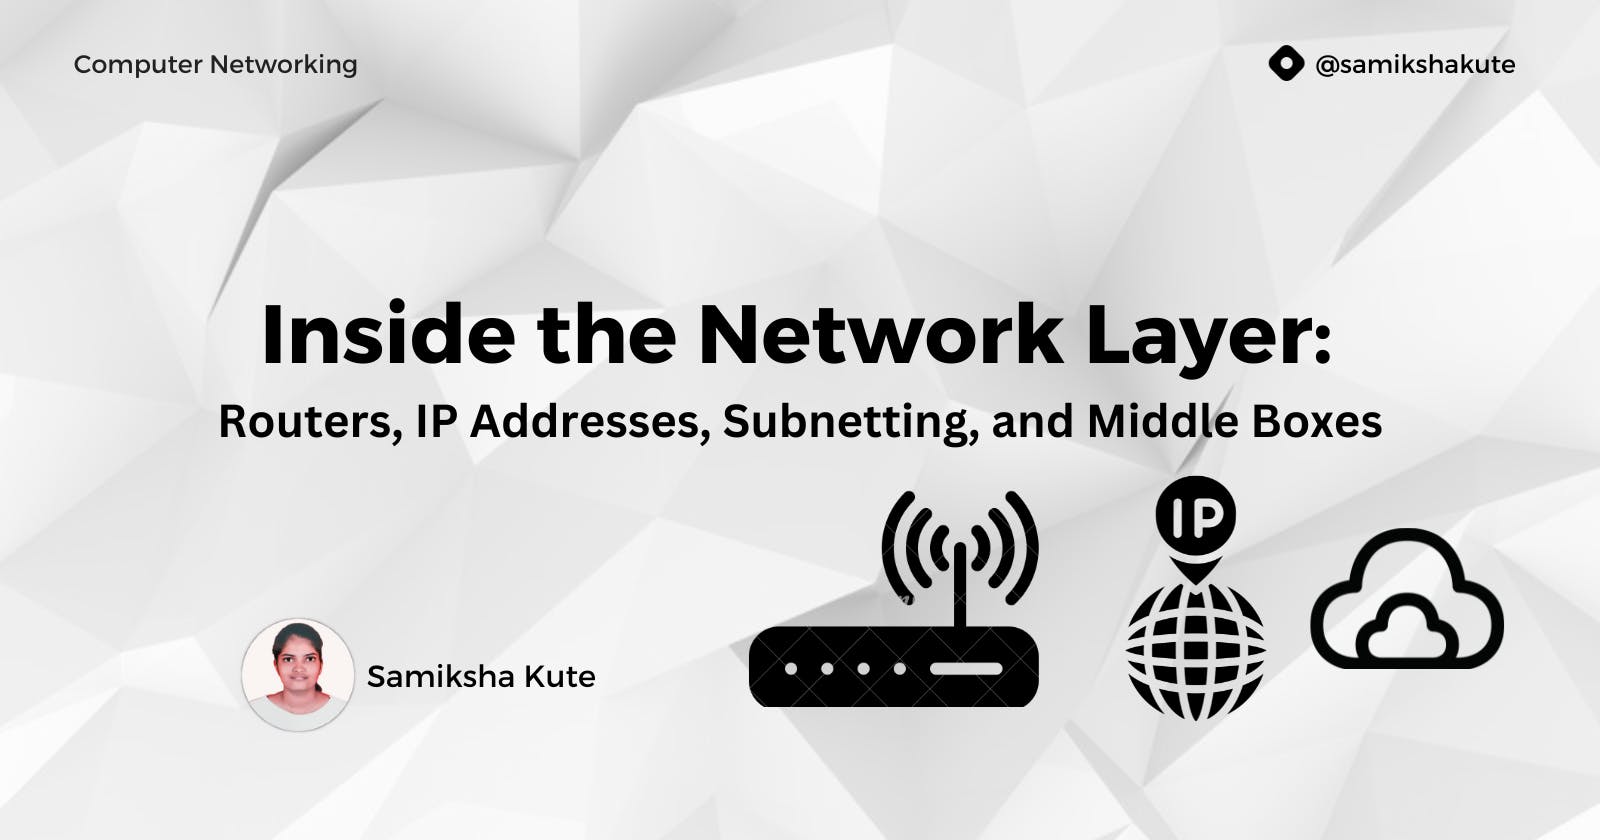 Inside the Network Layer: Routers, IP Addresses, Subnetting, and Middle Boxes